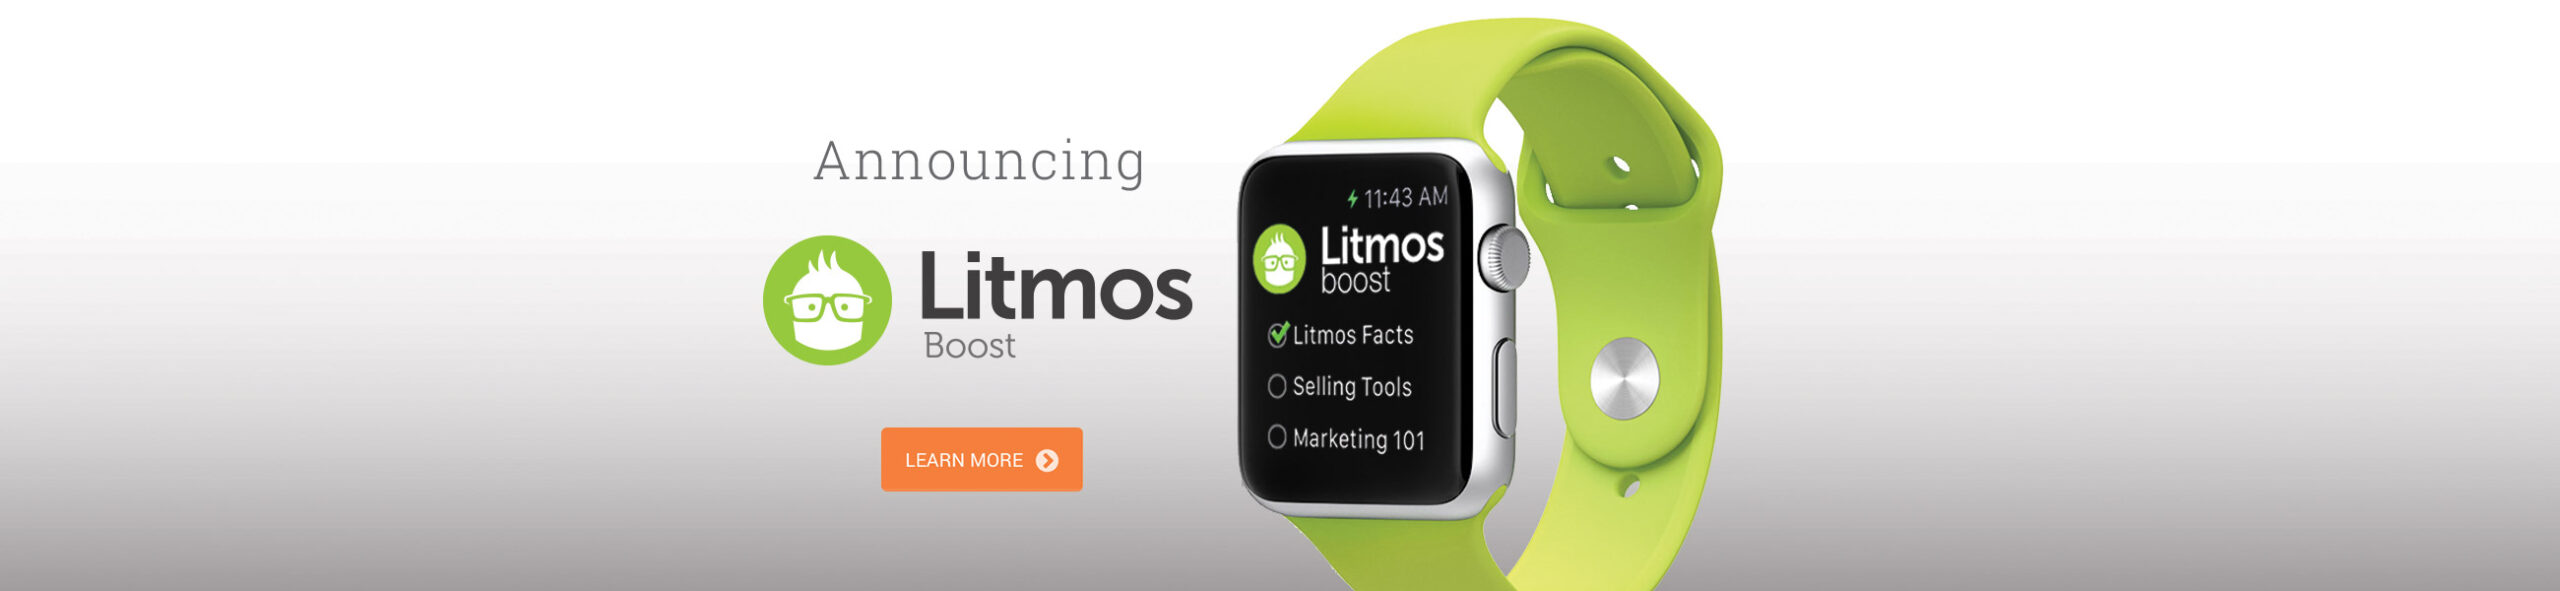 litmos boost for apple watch scaled